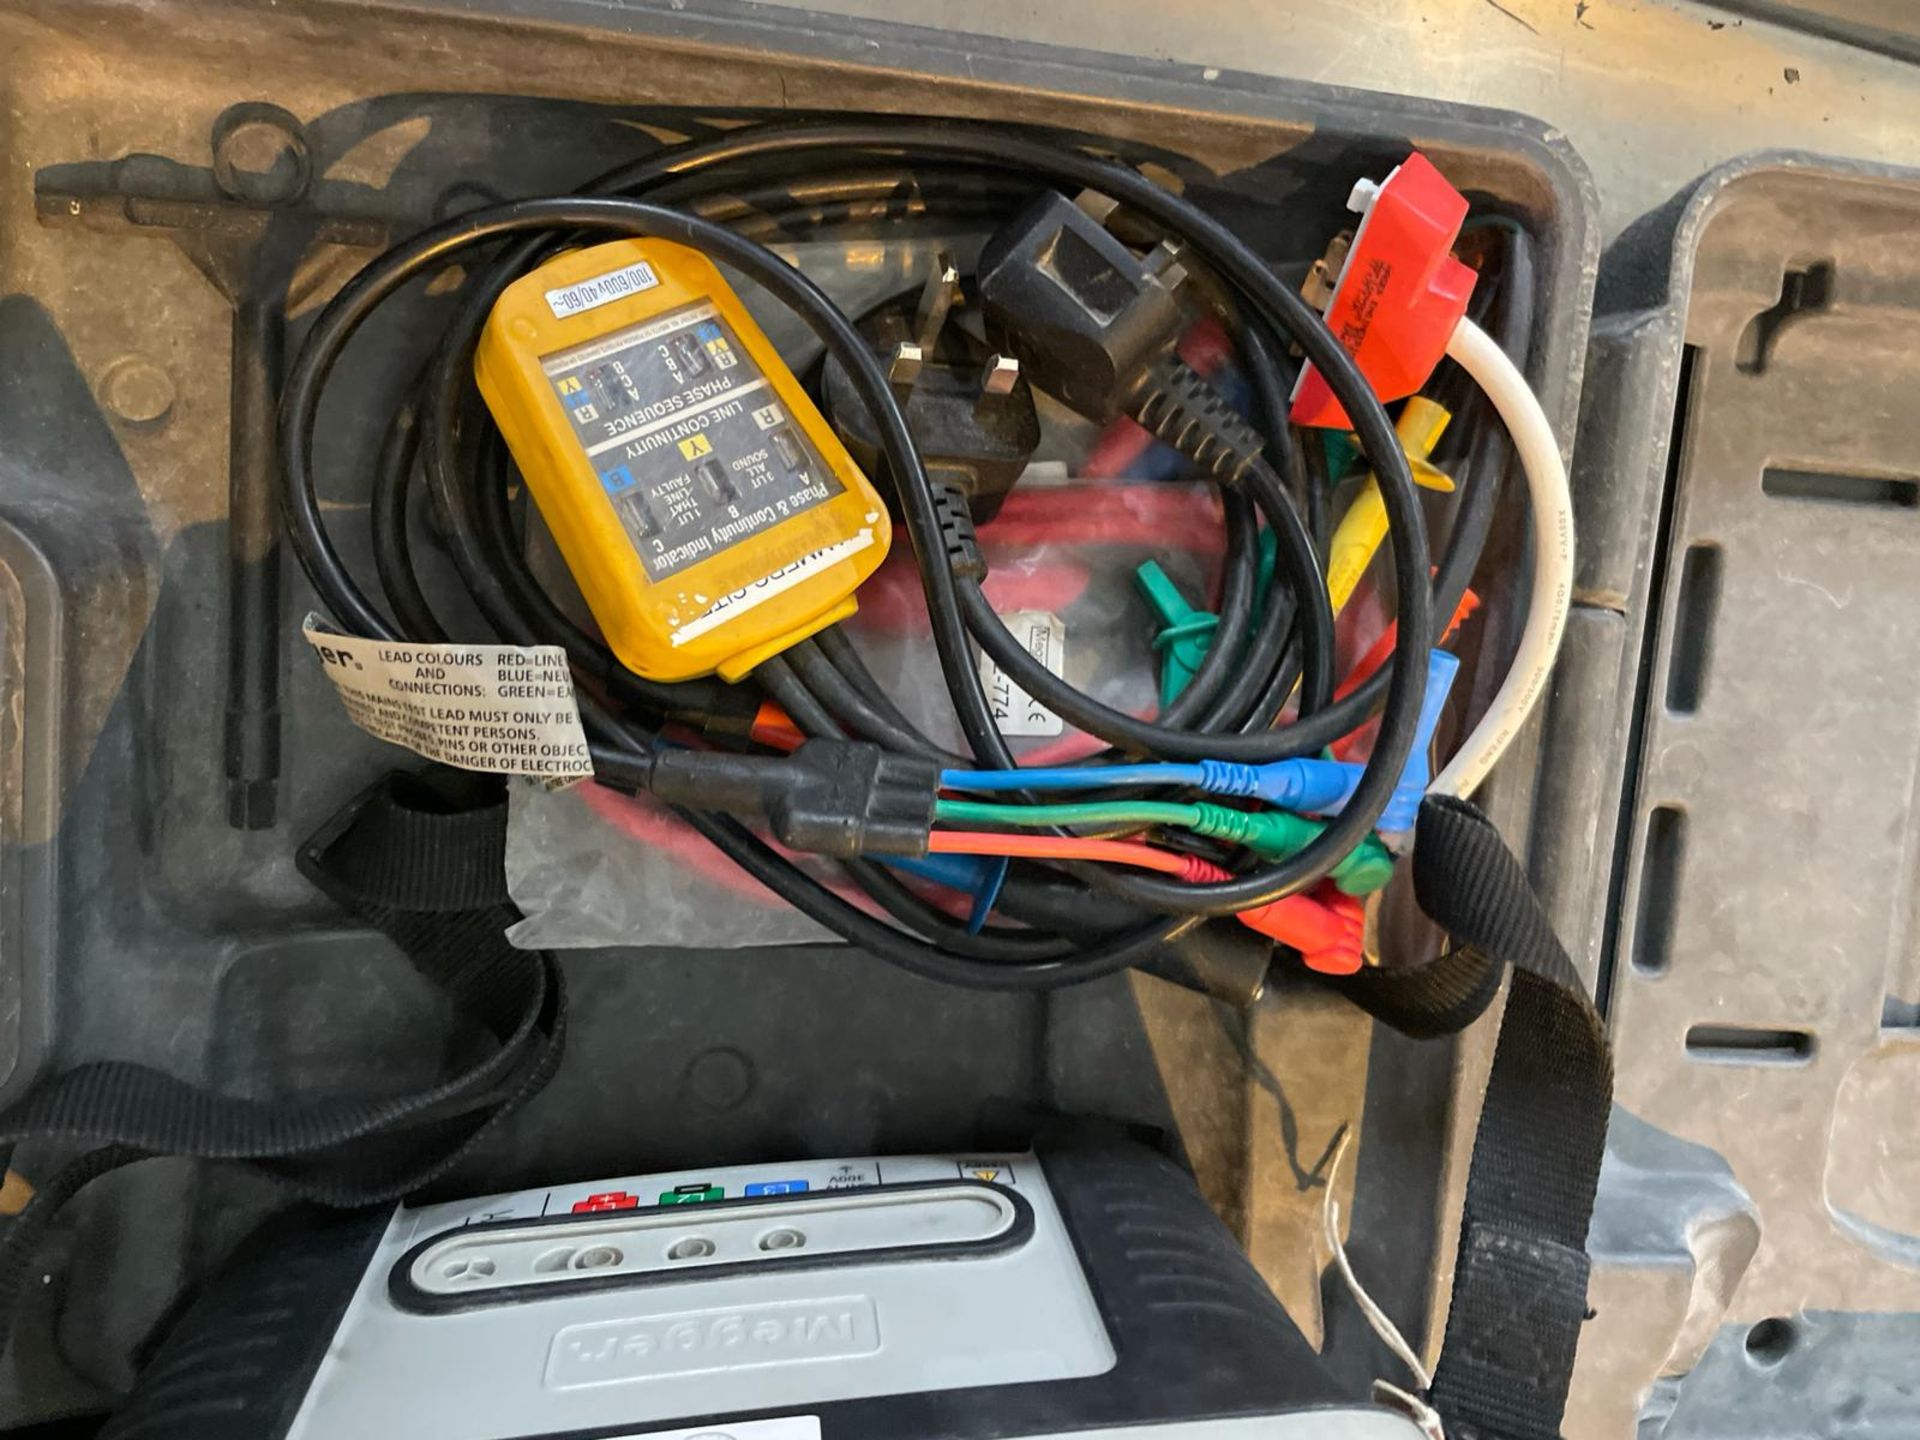 1 x Megger Testing Kit Including LCB2500 Loop/RCD Tester and a BMM2500 Insulation Multimeter - Image 11 of 12